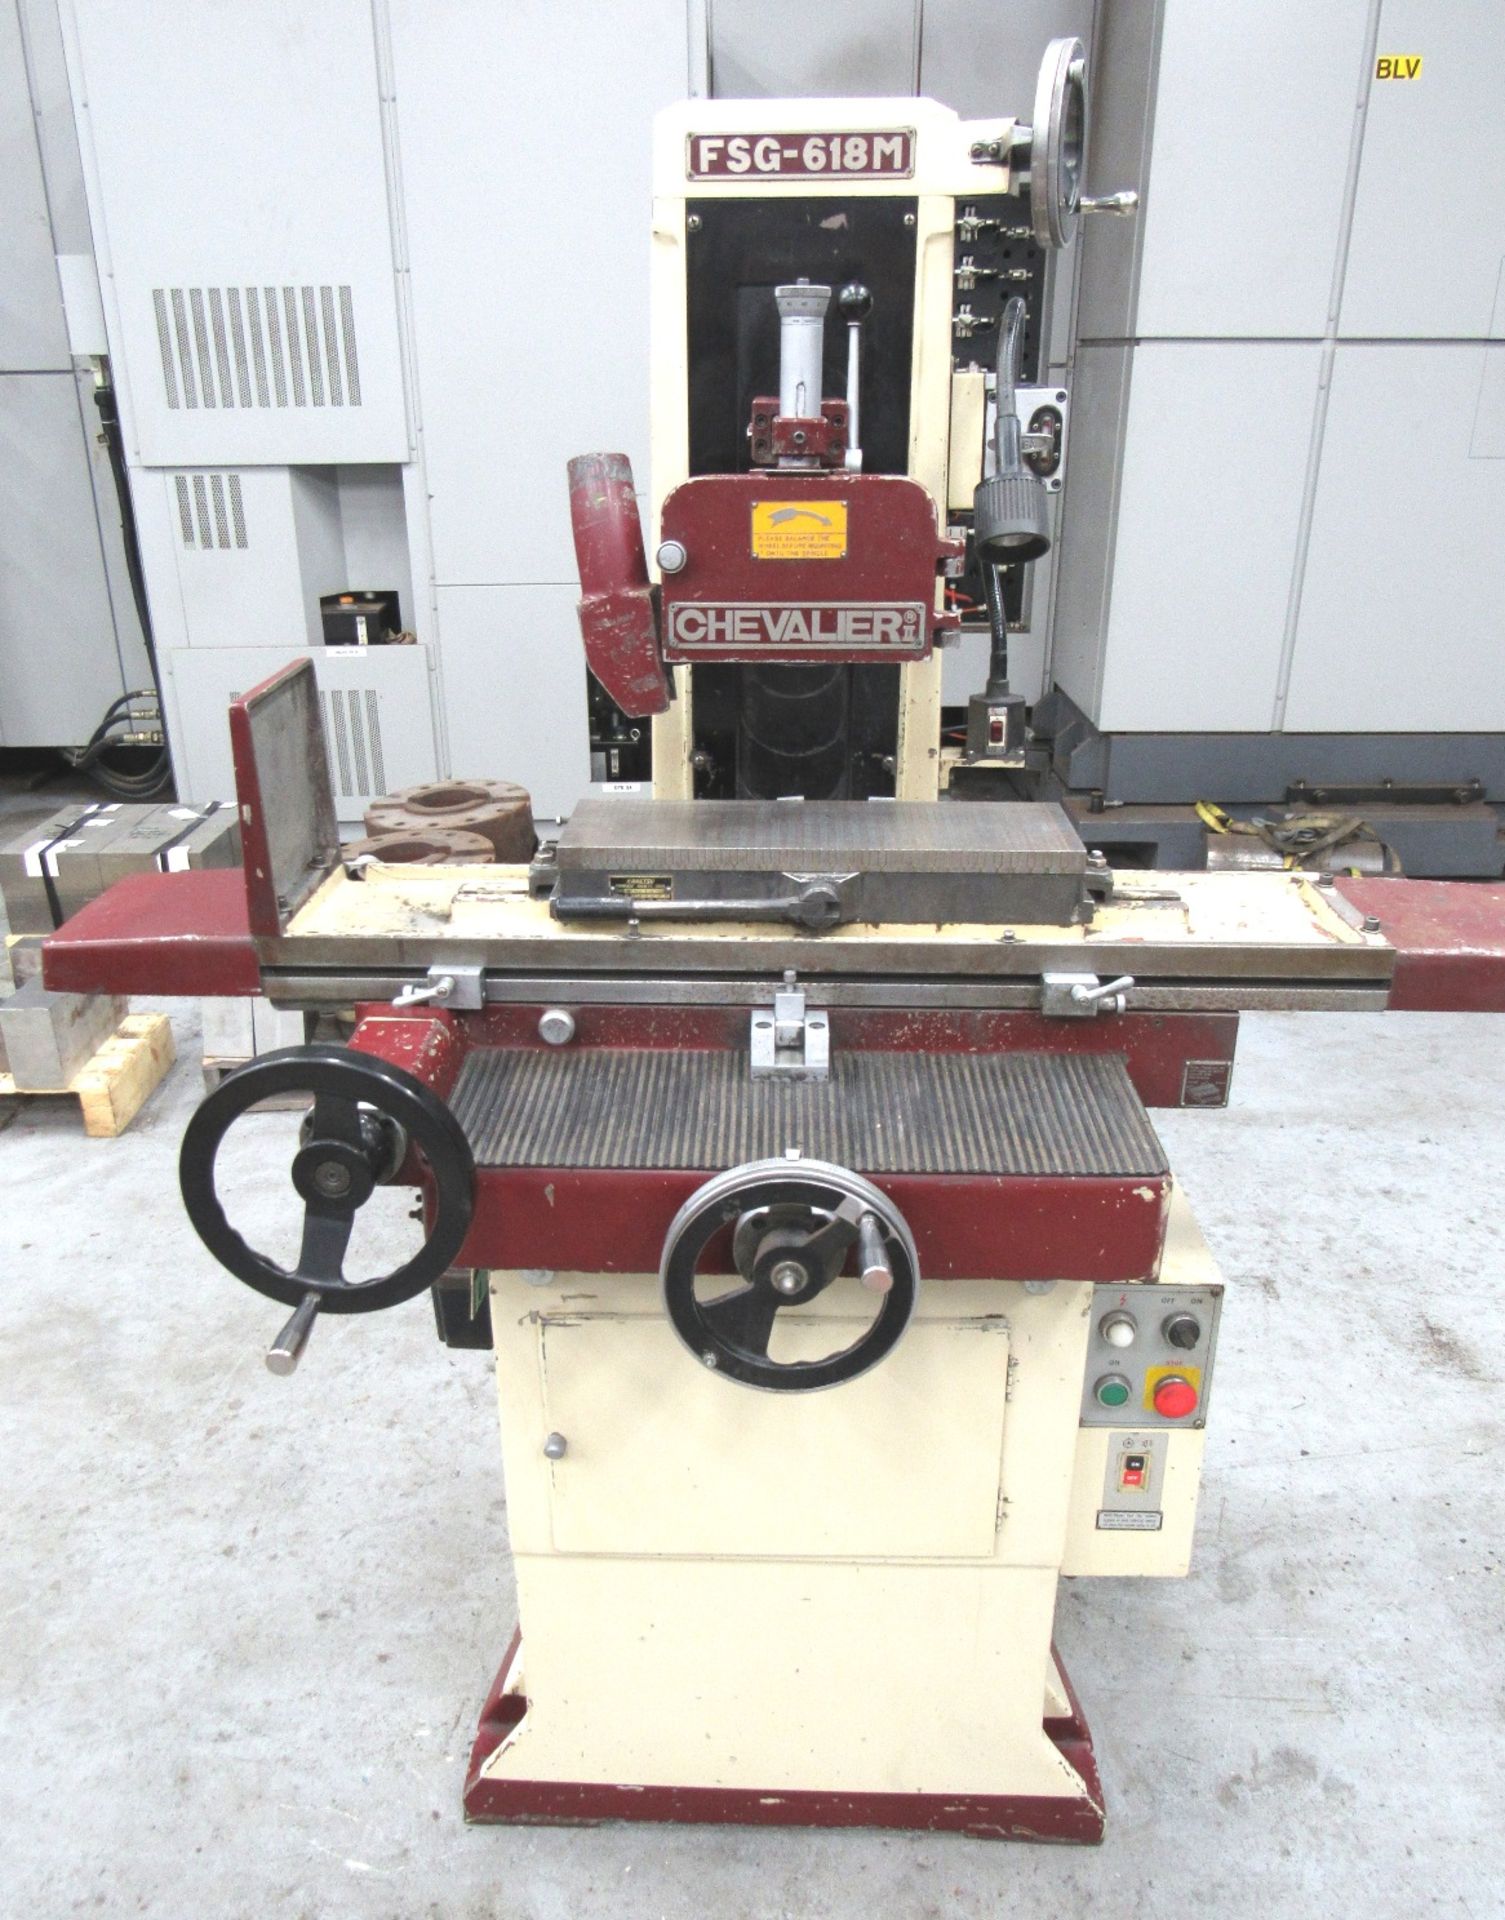 Chevalier Mod.FSG-618M 6”x18” Hand Feed Surface Grinder - Image 3 of 3